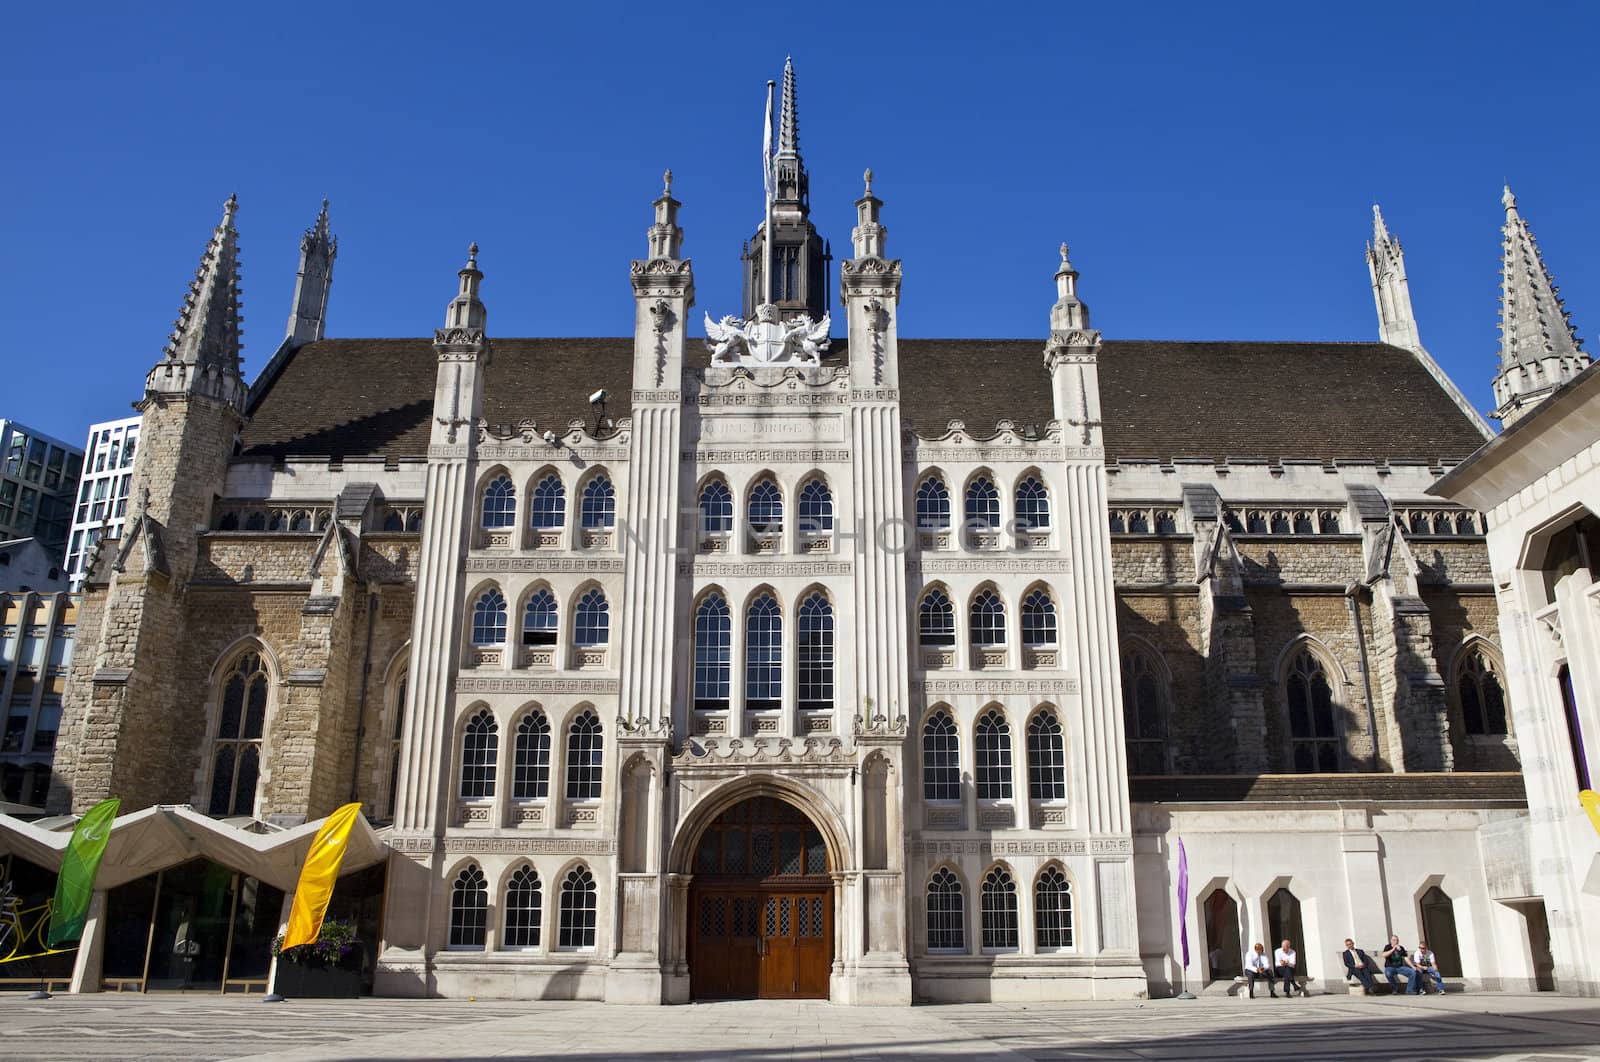 The magnificent Guildhall in London.